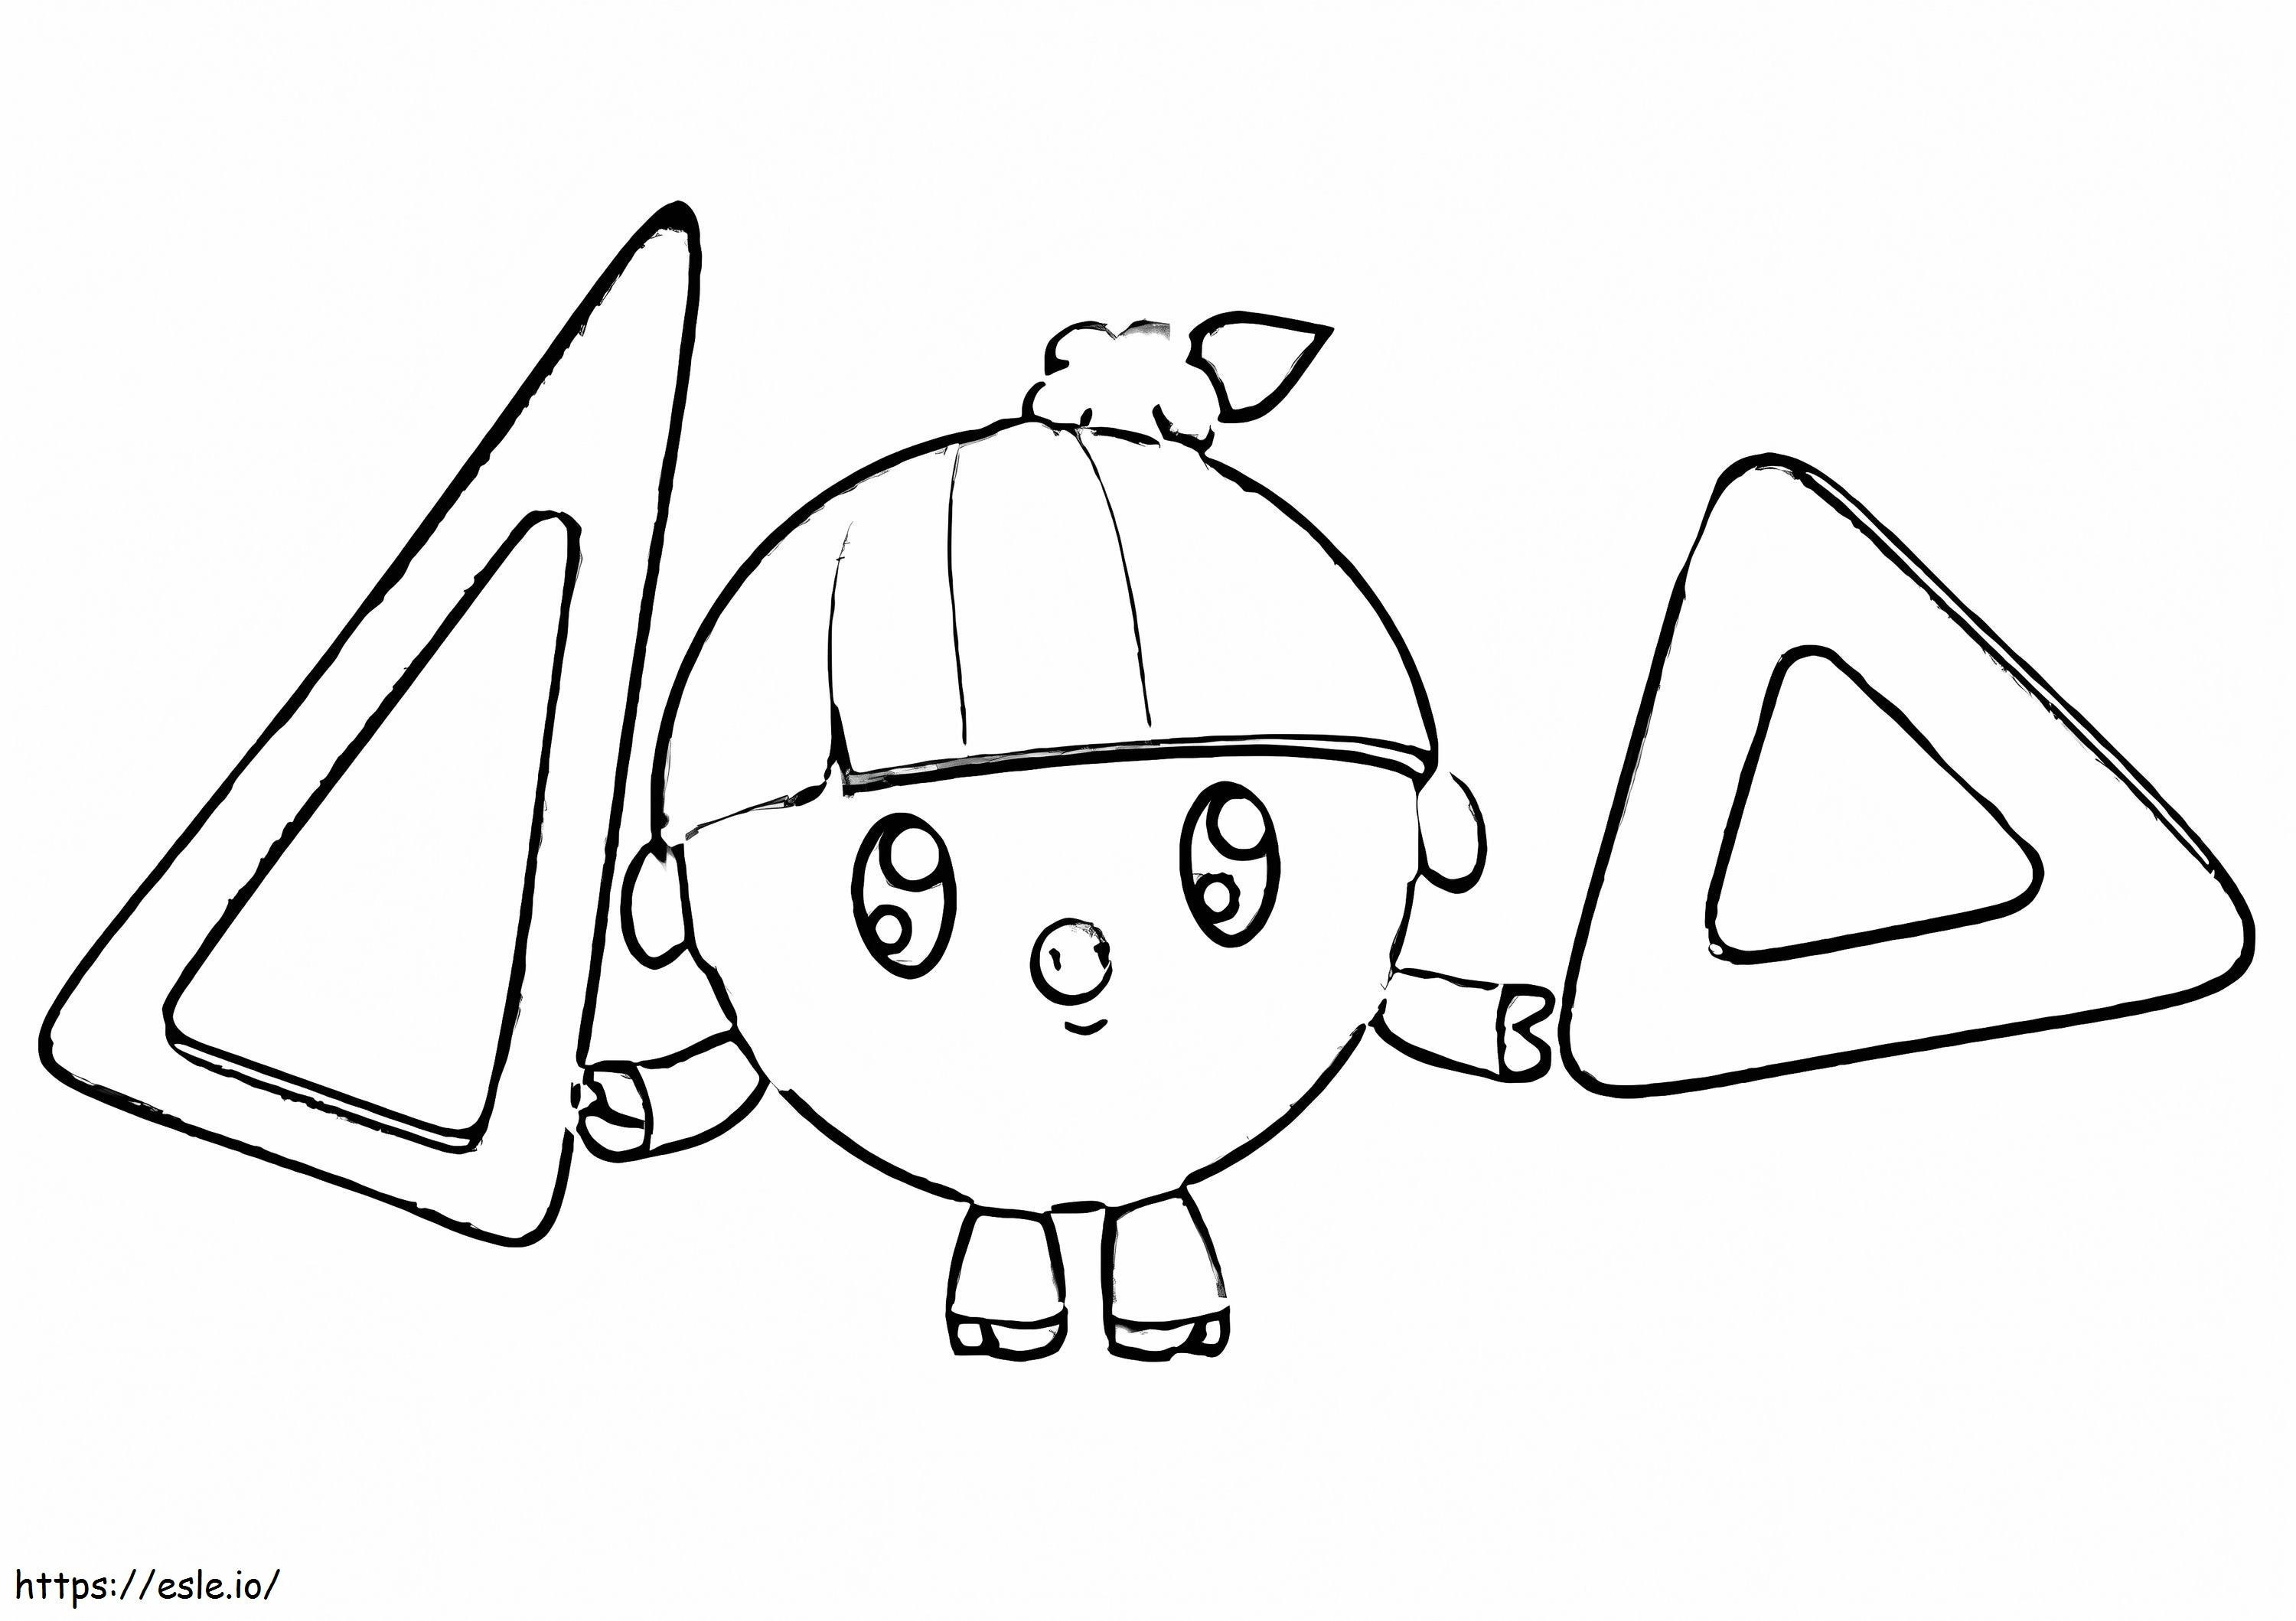 Rosy From BabyRiki coloring page